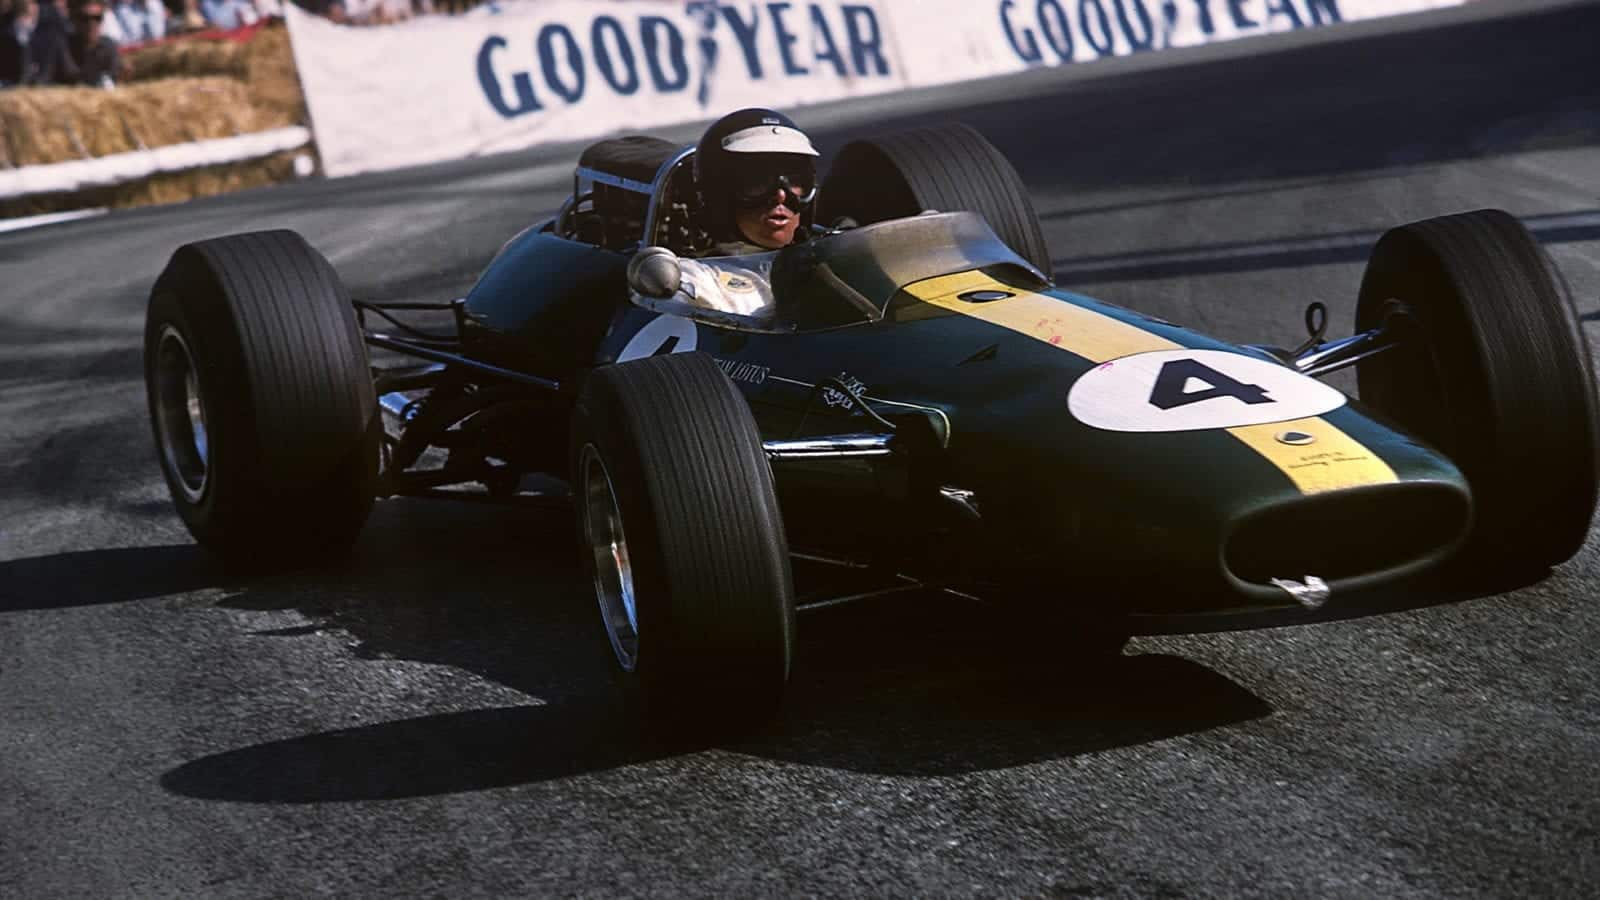 Jim Clark, Lotus 33 Coventry Climax, Grand Prix of Monaco, Monaco, 22 May 1966. (Photo by Bernard Cahier/Getty Images)